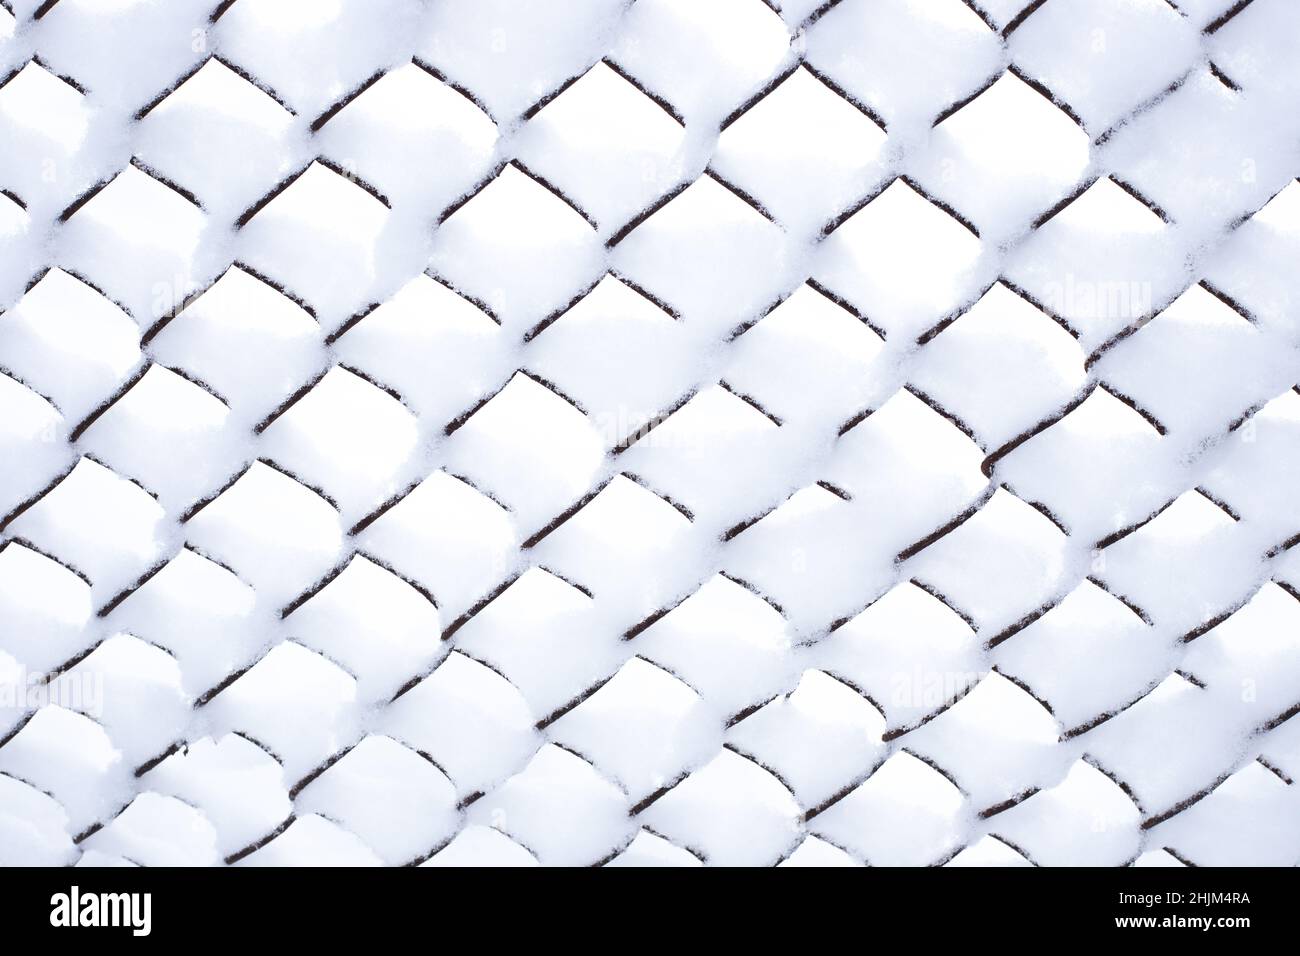 Winter background. The iron mesh netting is covered with snow. Stock Photo